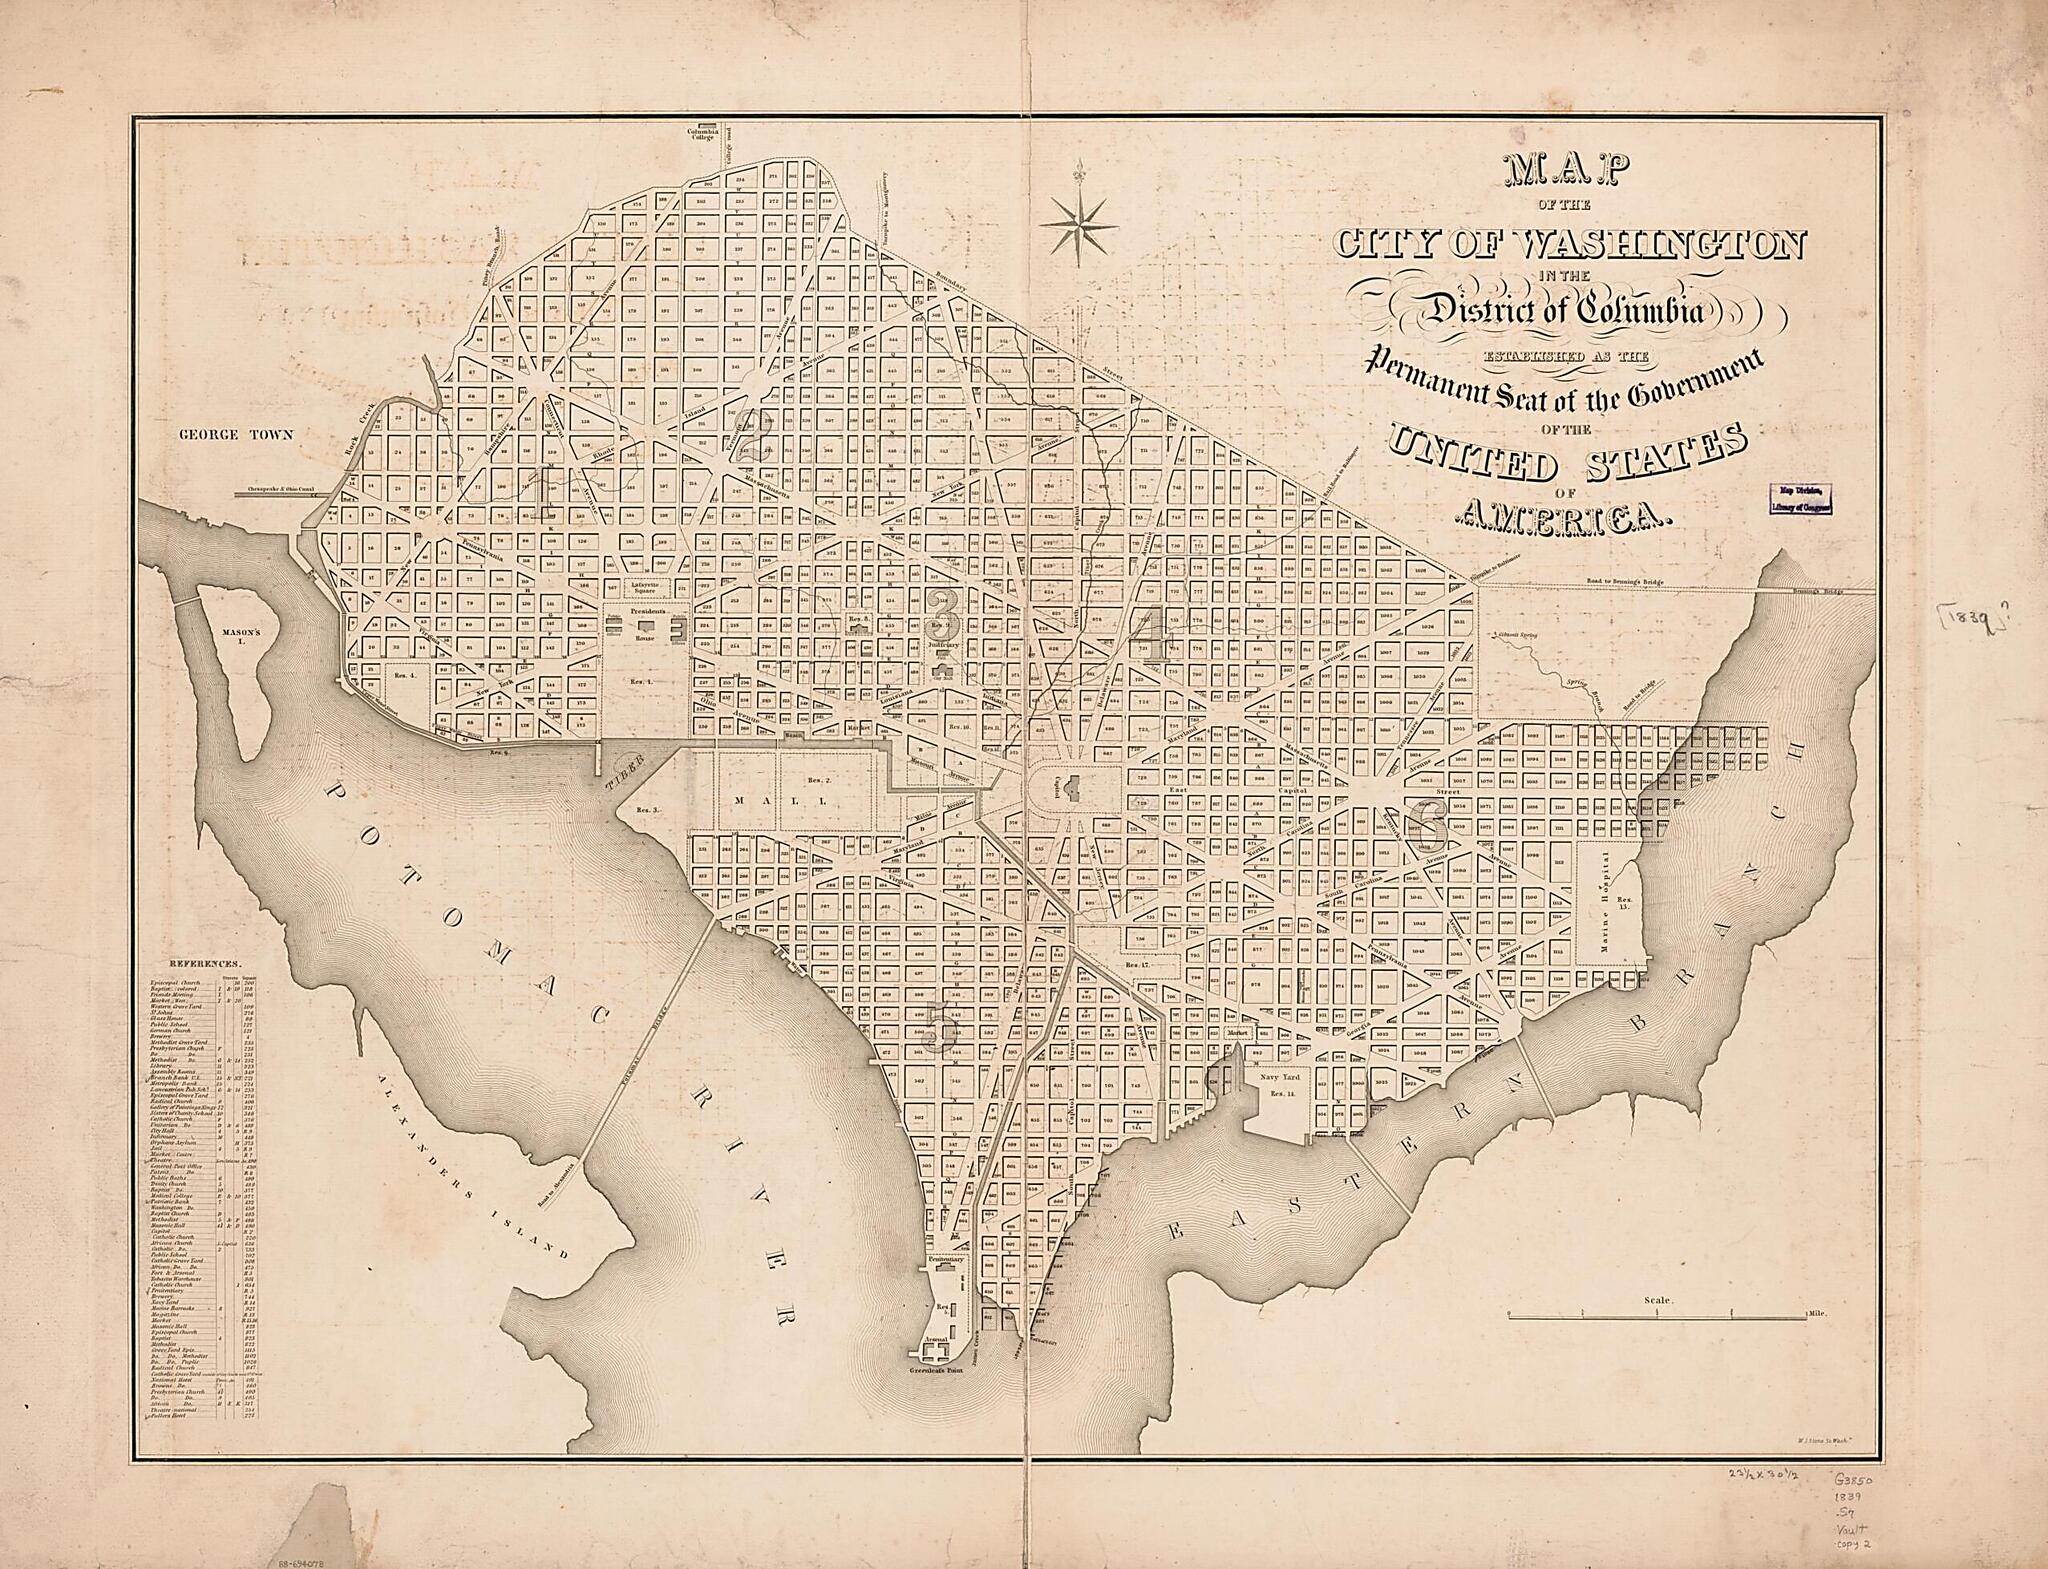 This old map of Map of the City of Washington In the District of Columbia : Established As the Permanent Seat of the Government of the United States of America from 1839 was created by William James Stone in 1839